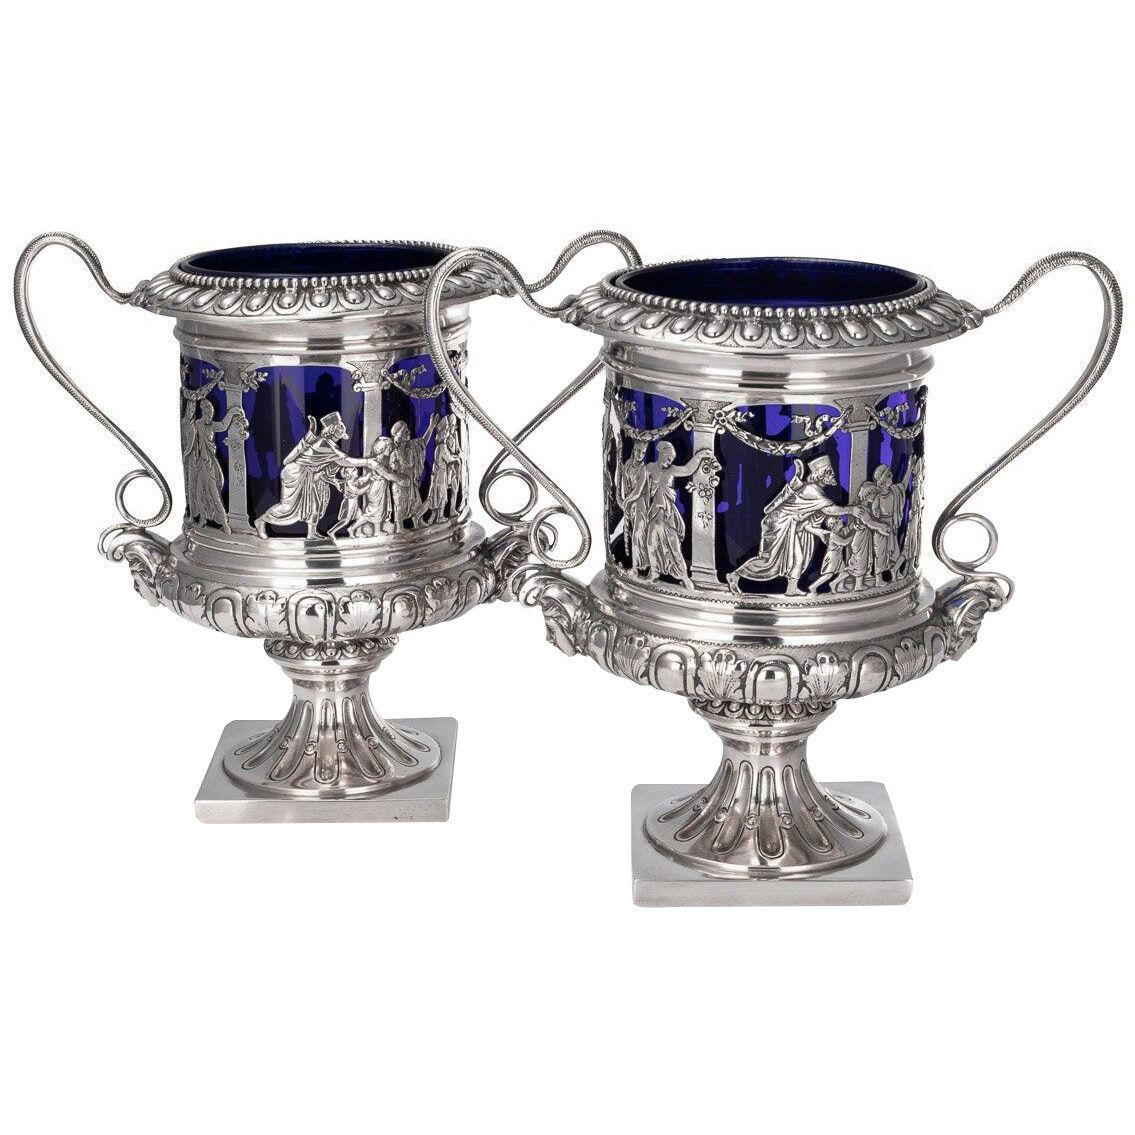 20thC German Neo-Classical Solid Silver & Glass Wine Coolers c.1900